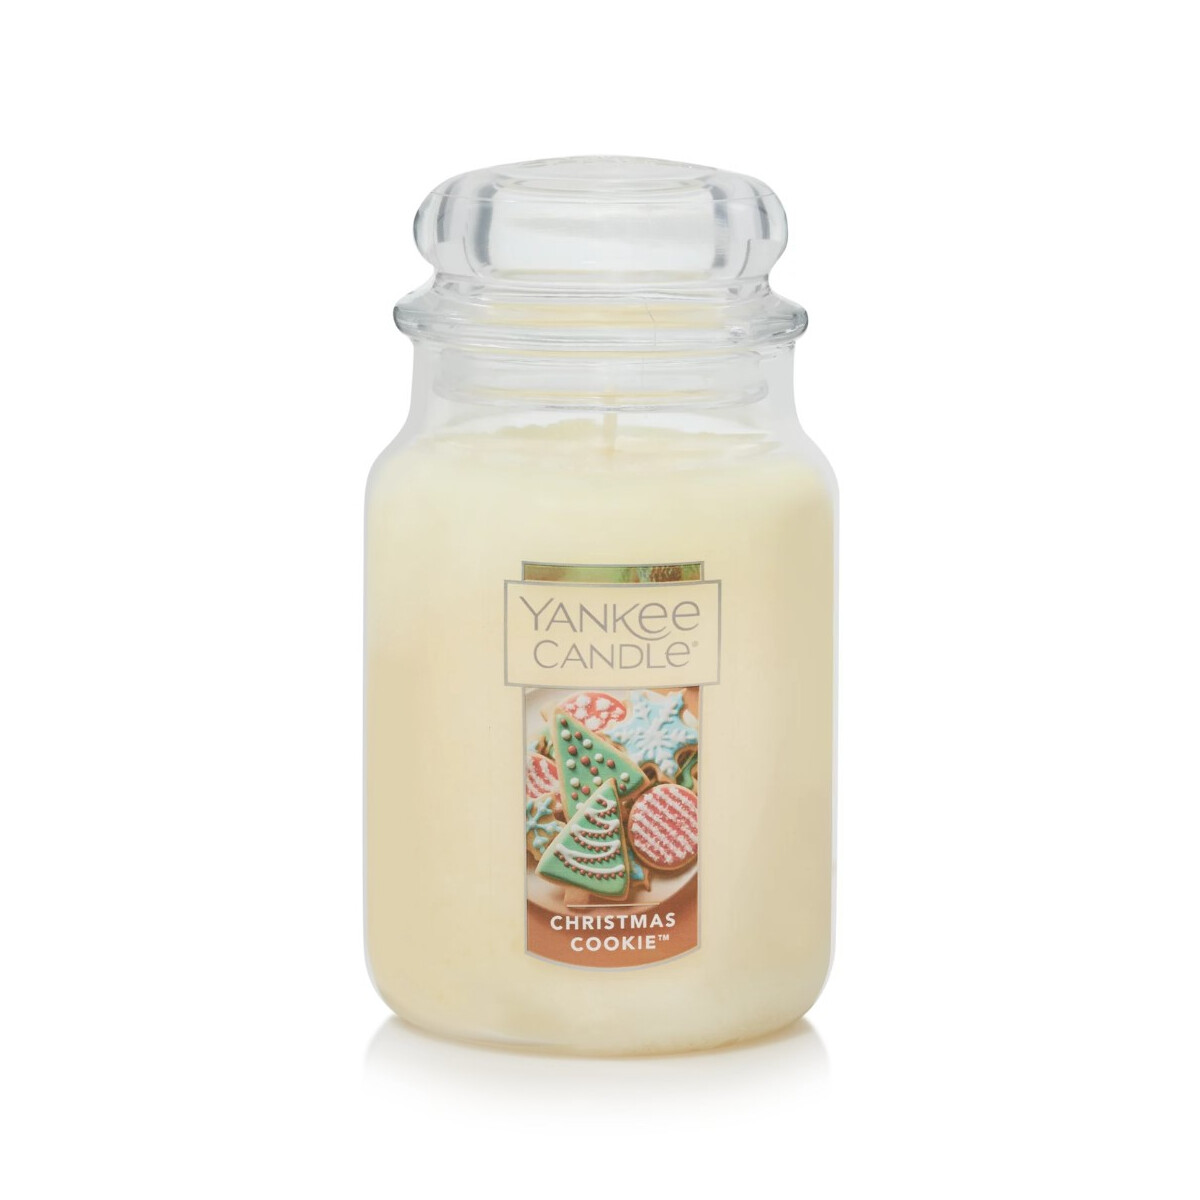 Yankee Candle® Christmas Cookie™ Großes Glas 623g, 36,90 €